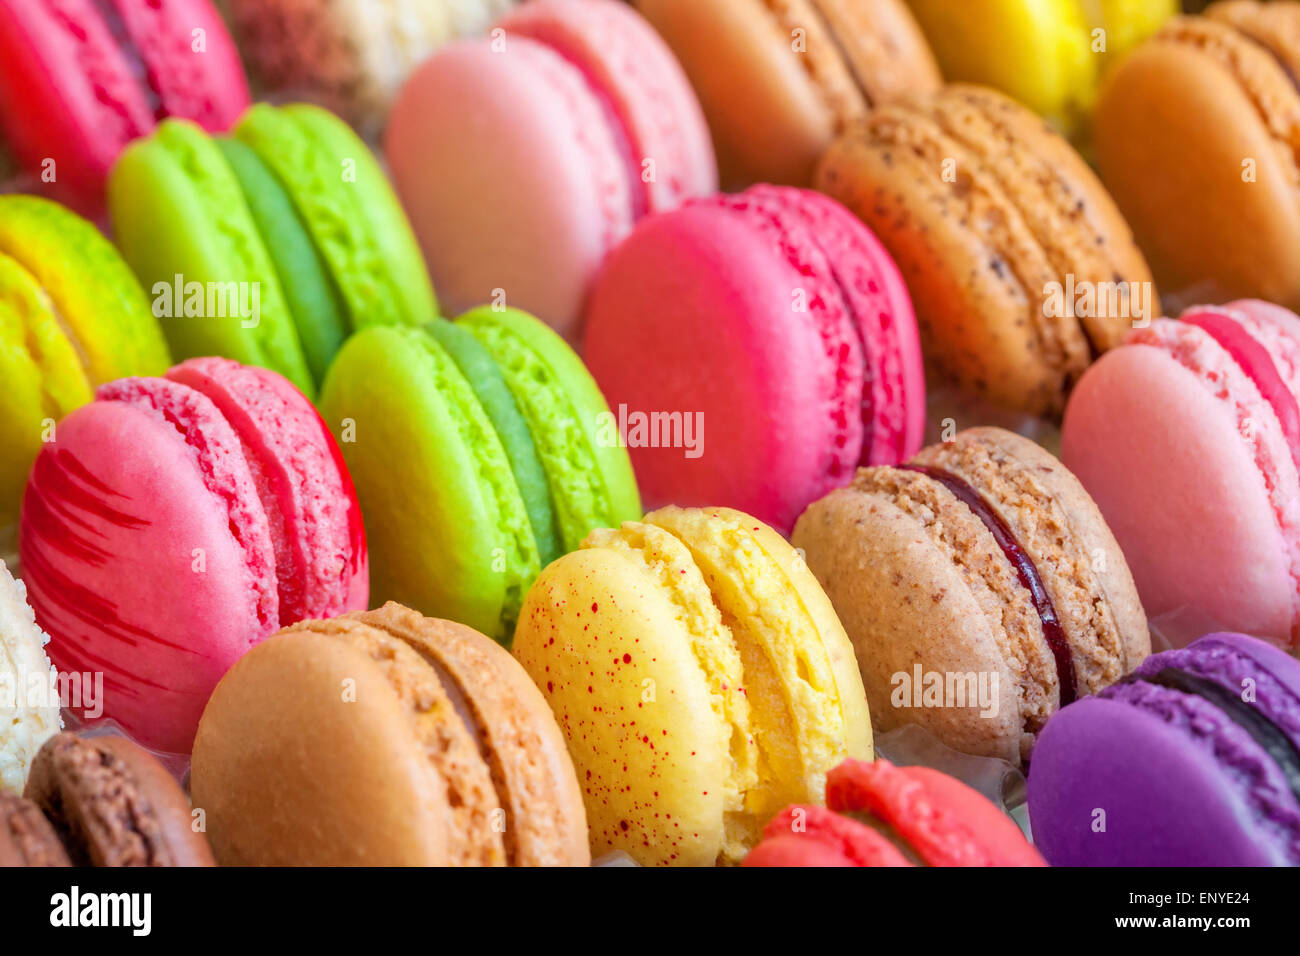 traditional french colorful macarons in a box Stock Photo